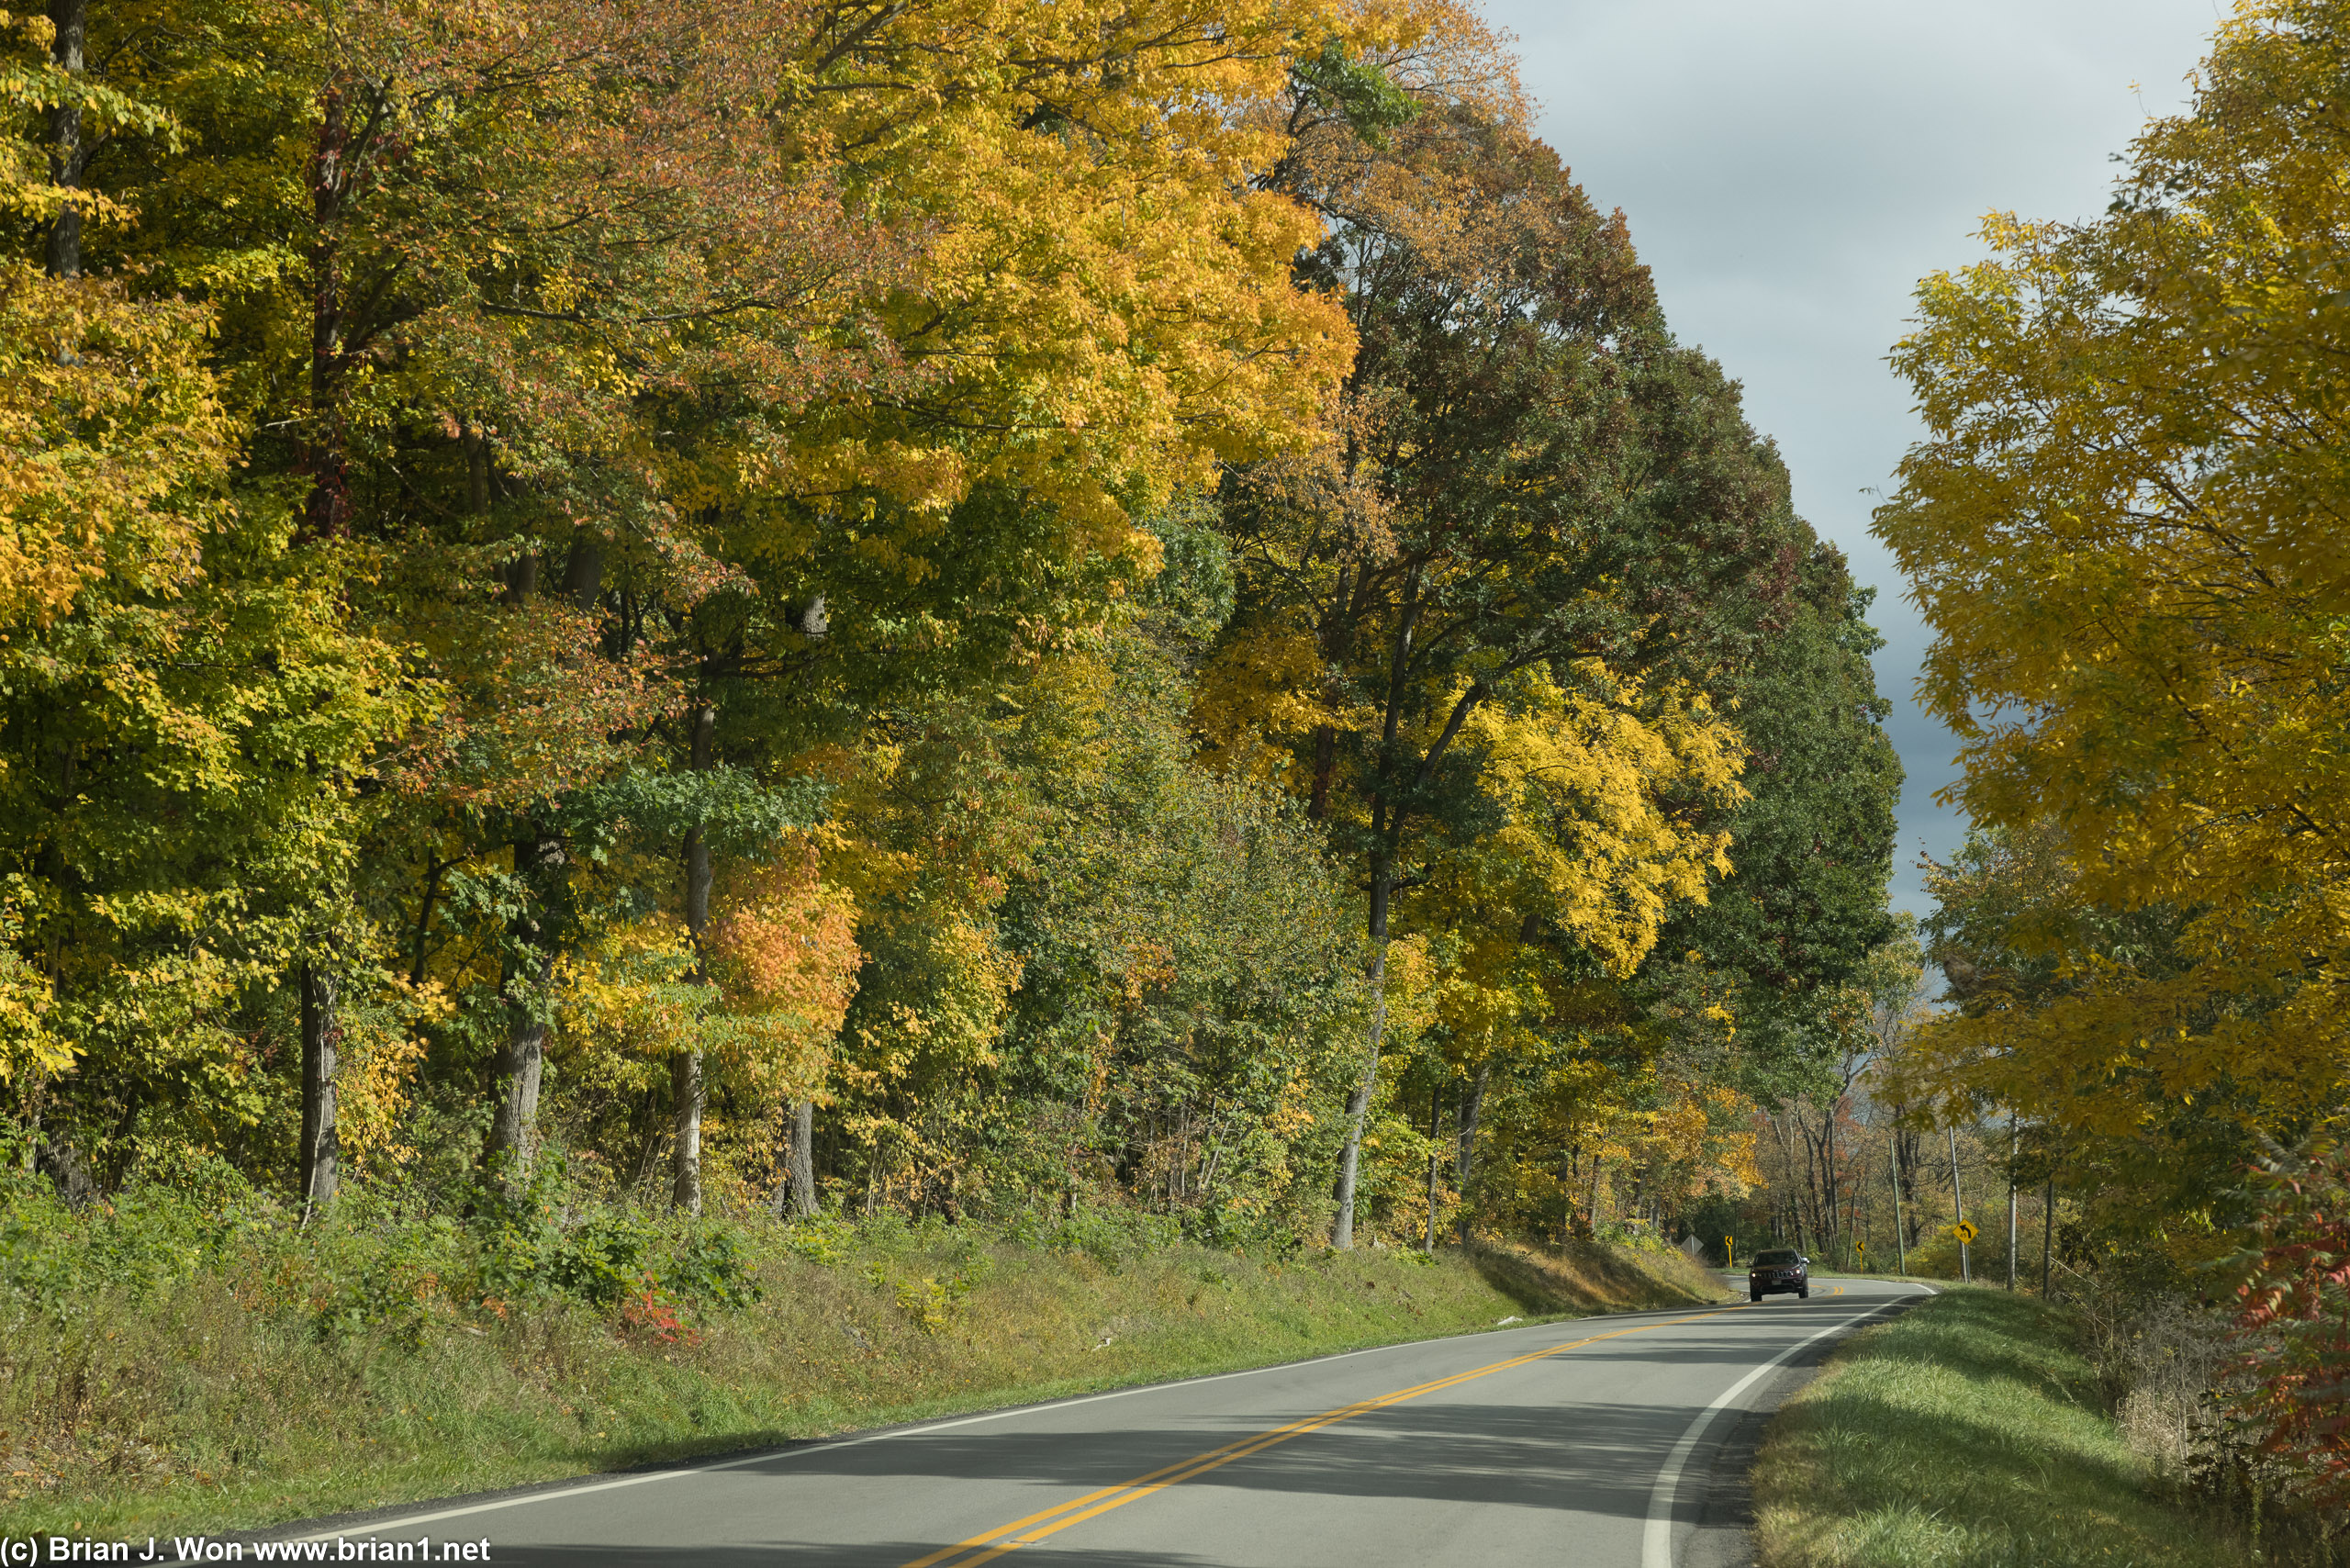 On the way to Mohican-Memorial State Forest/Mohican State Park.